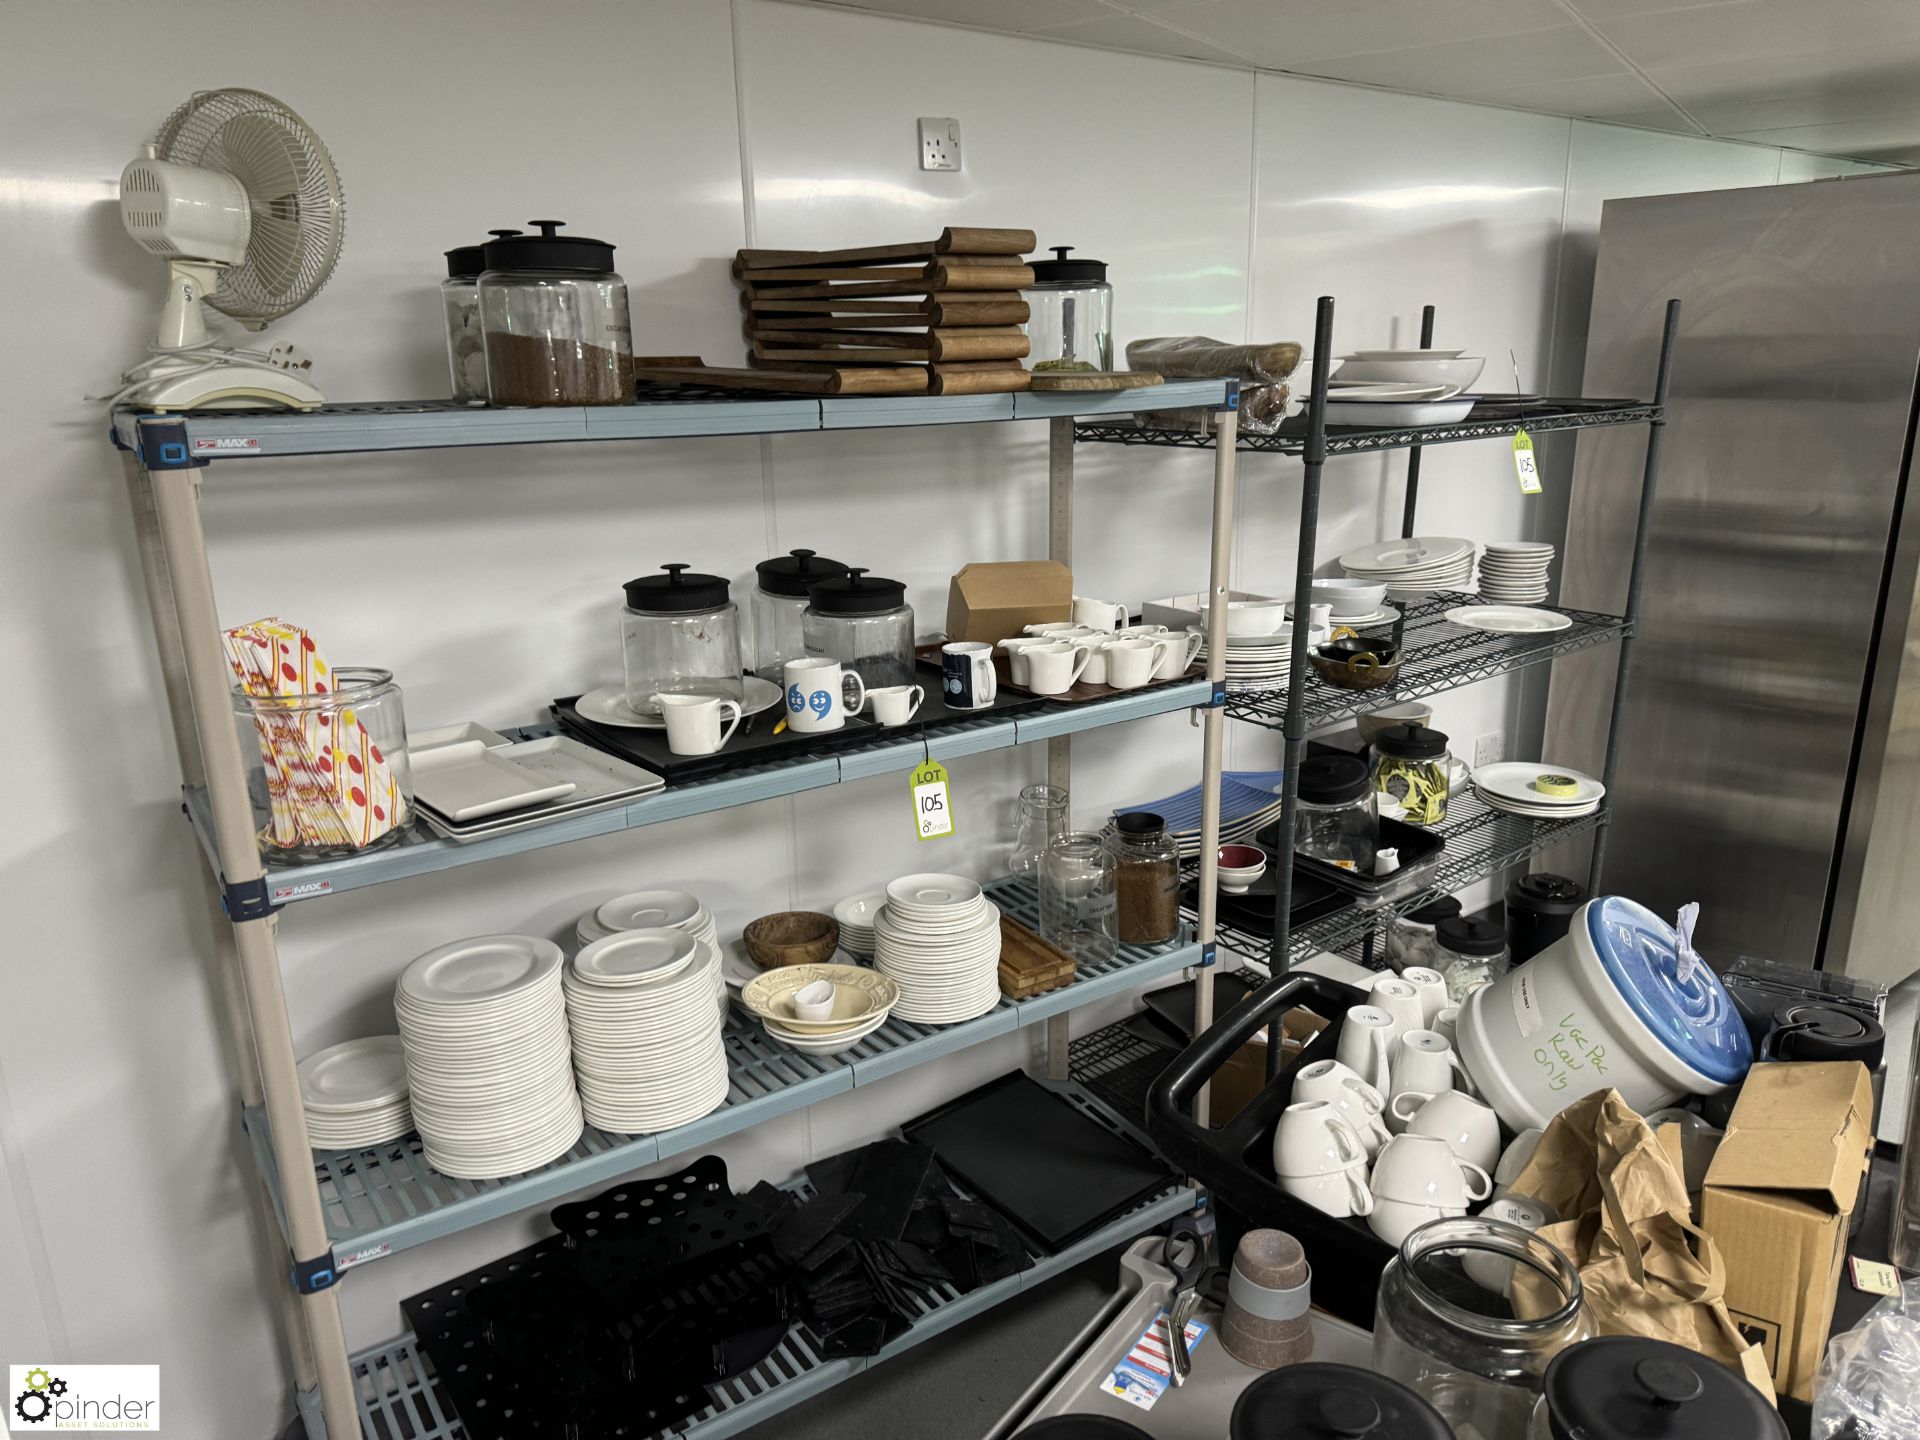 2 various Racks and Contents, including crockery, jars, etc (location in building – basement kitchen - Image 2 of 7